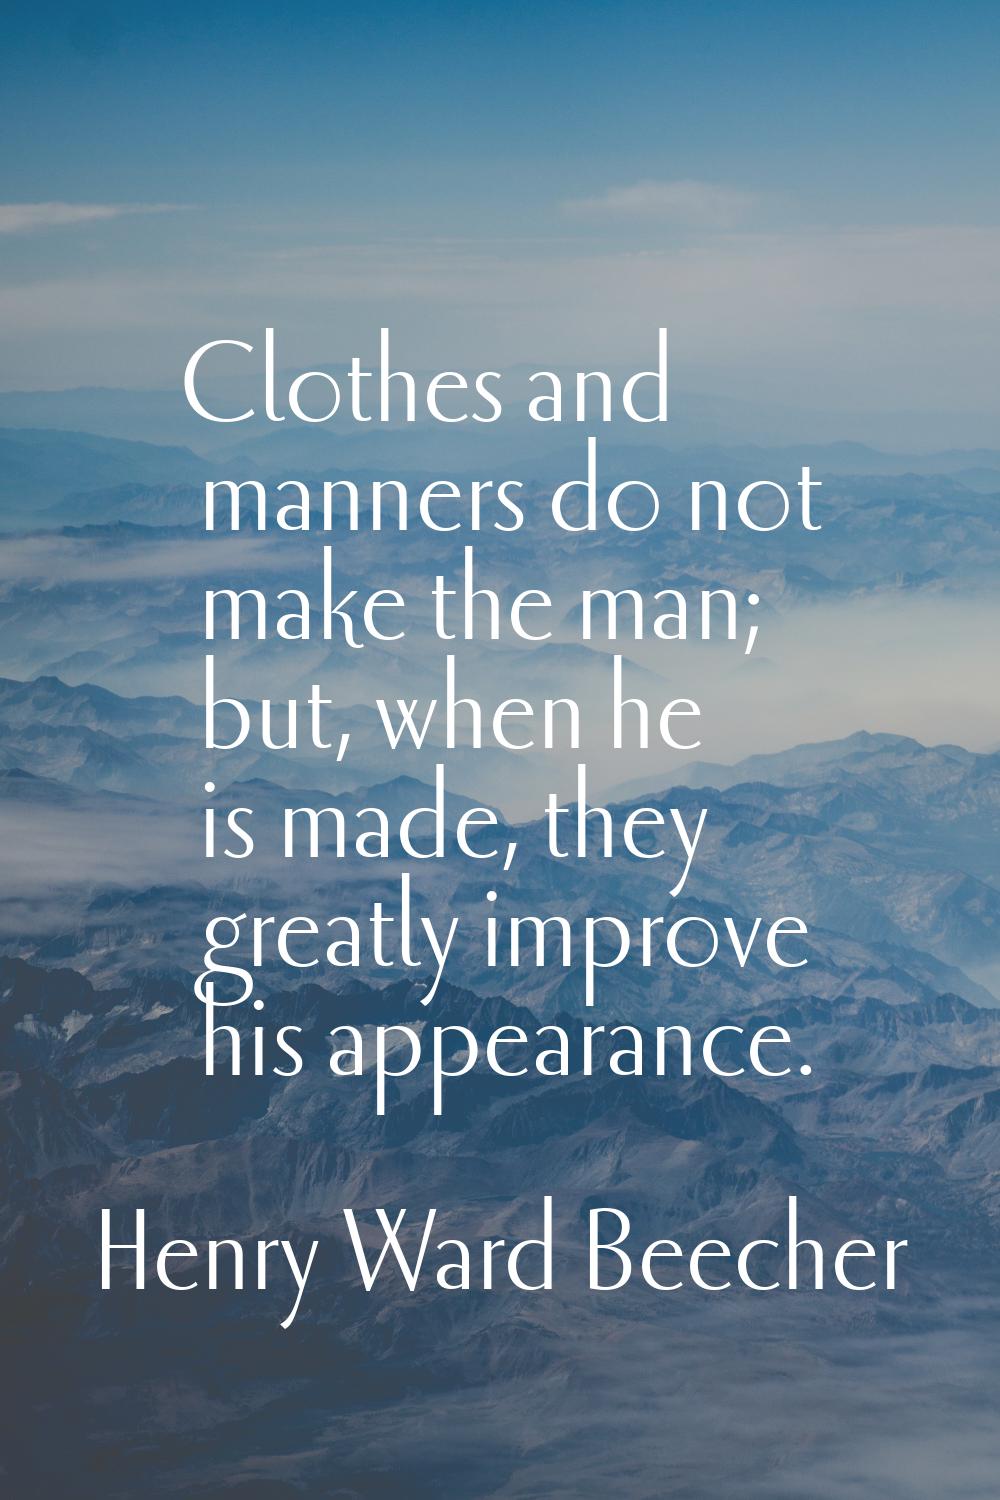 Clothes and manners do not make the man; but, when he is made, they greatly improve his appearance.